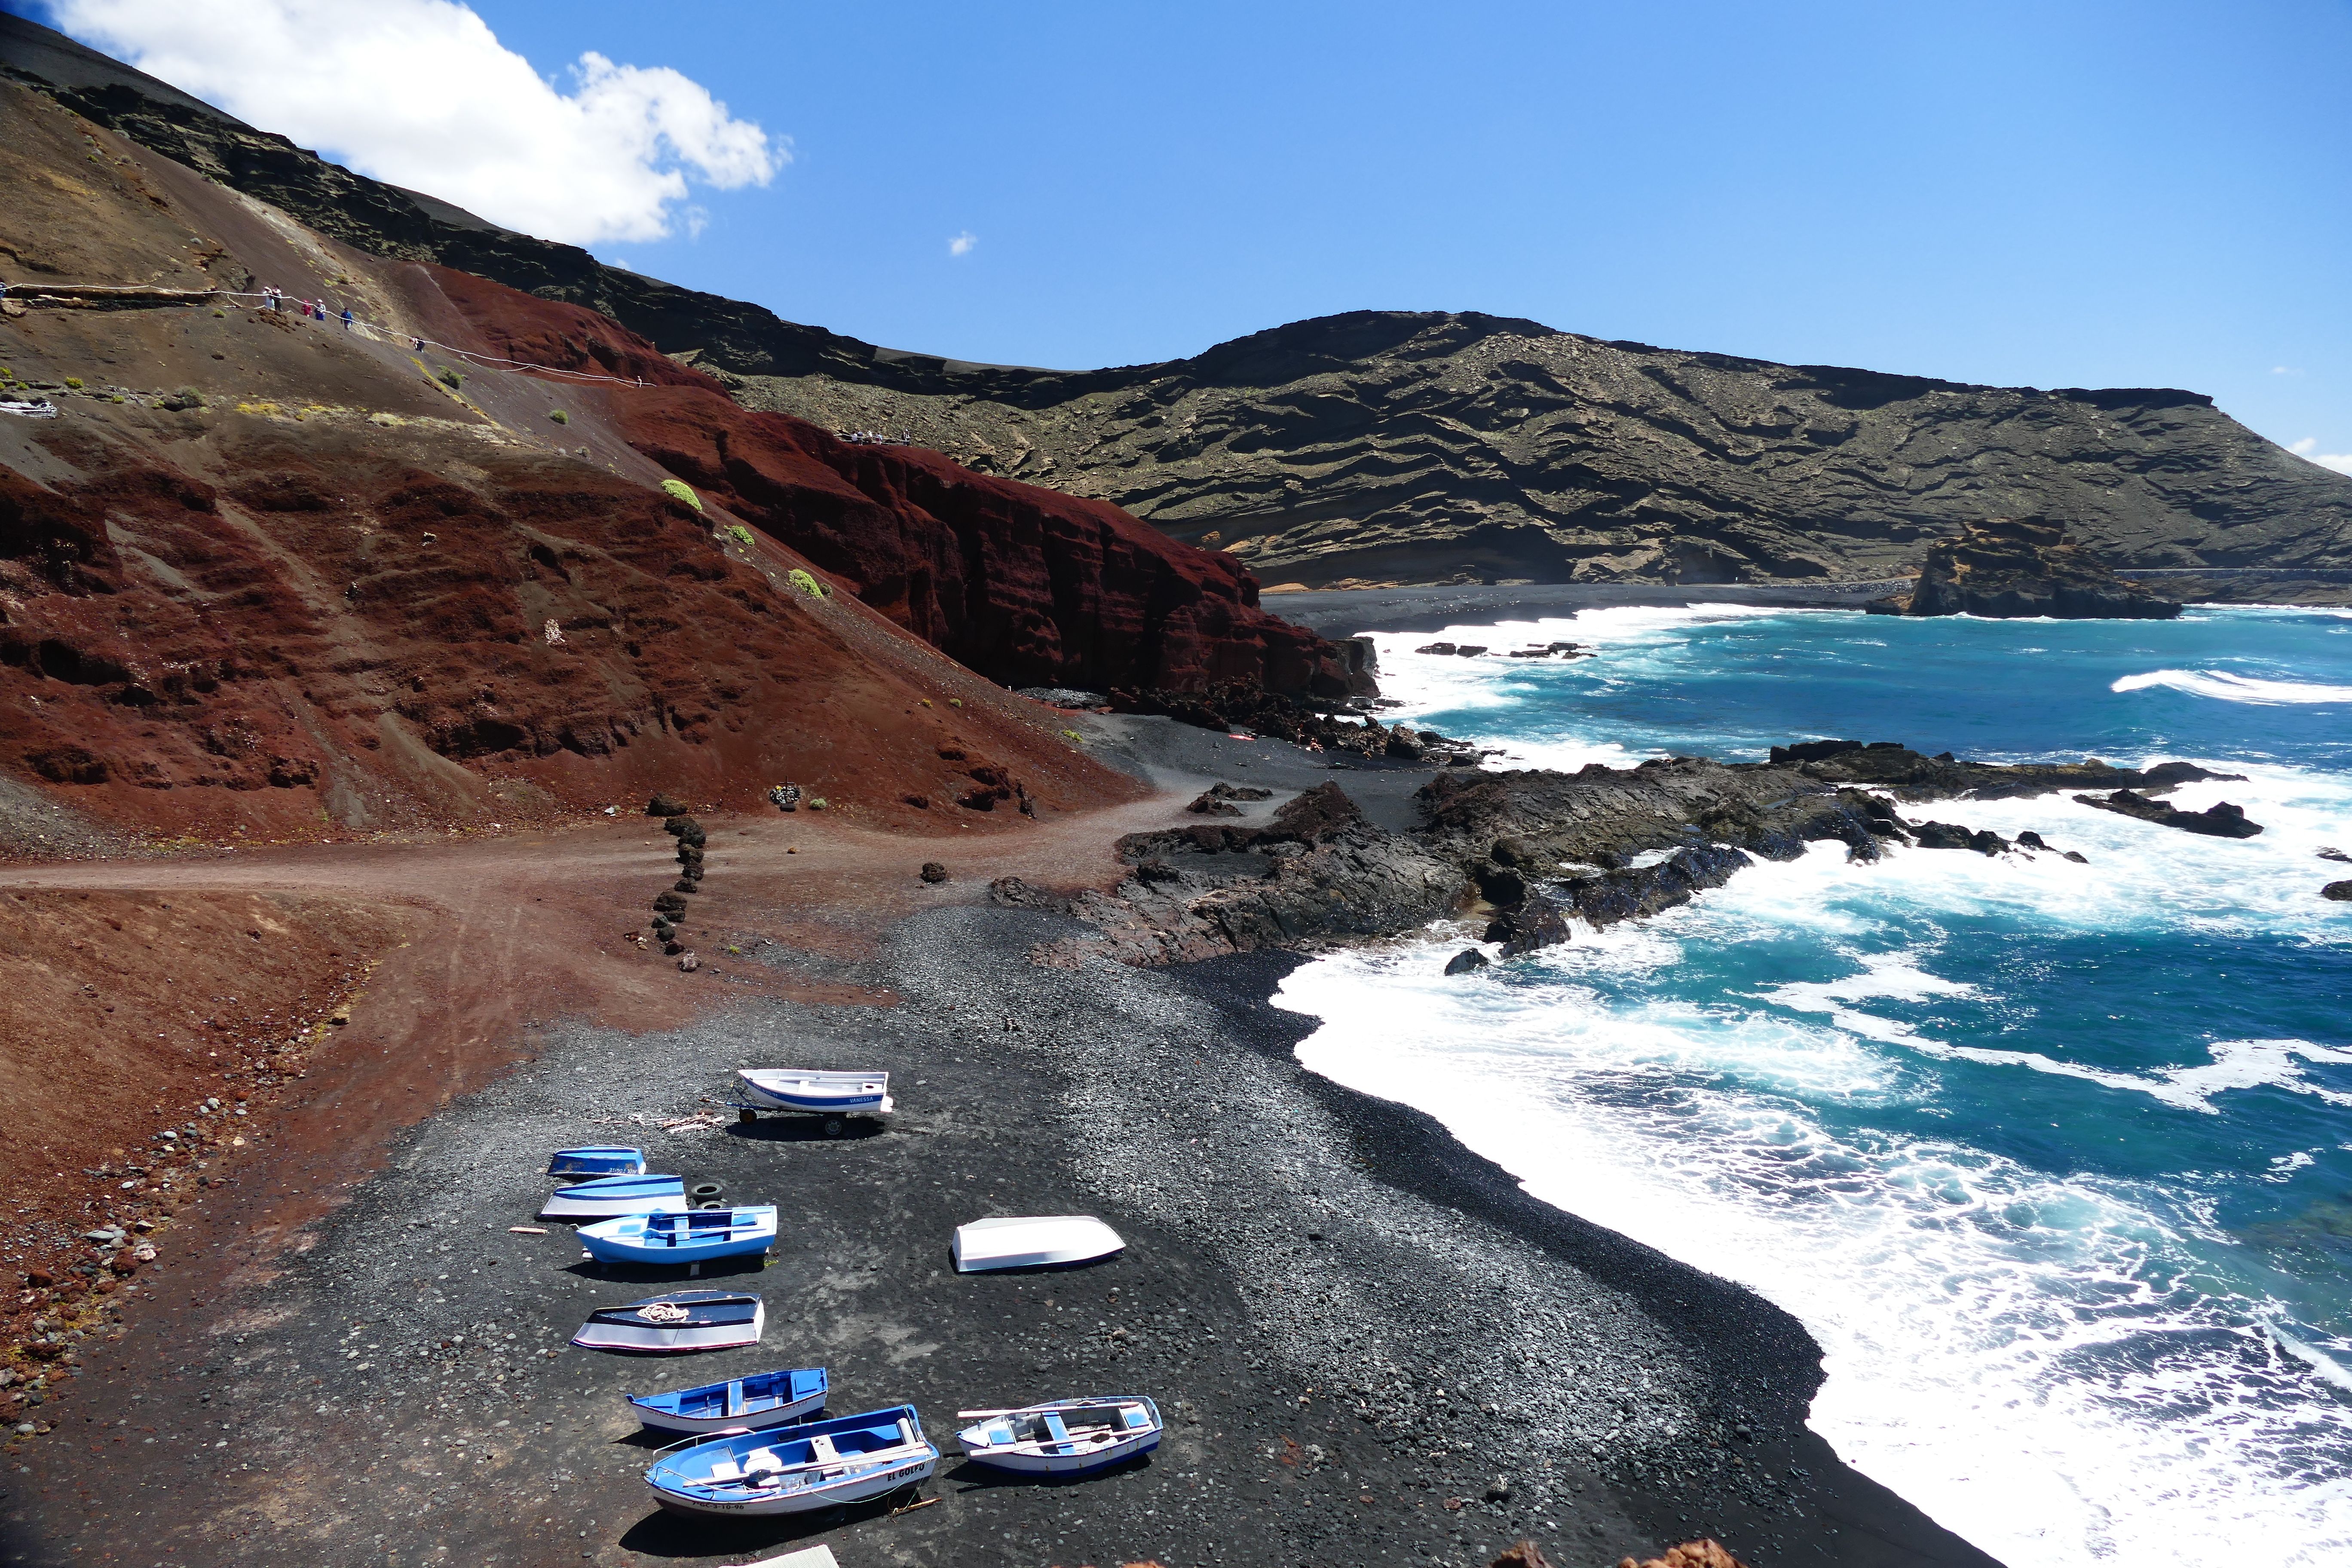 Photos of El Golfo: Images and photos